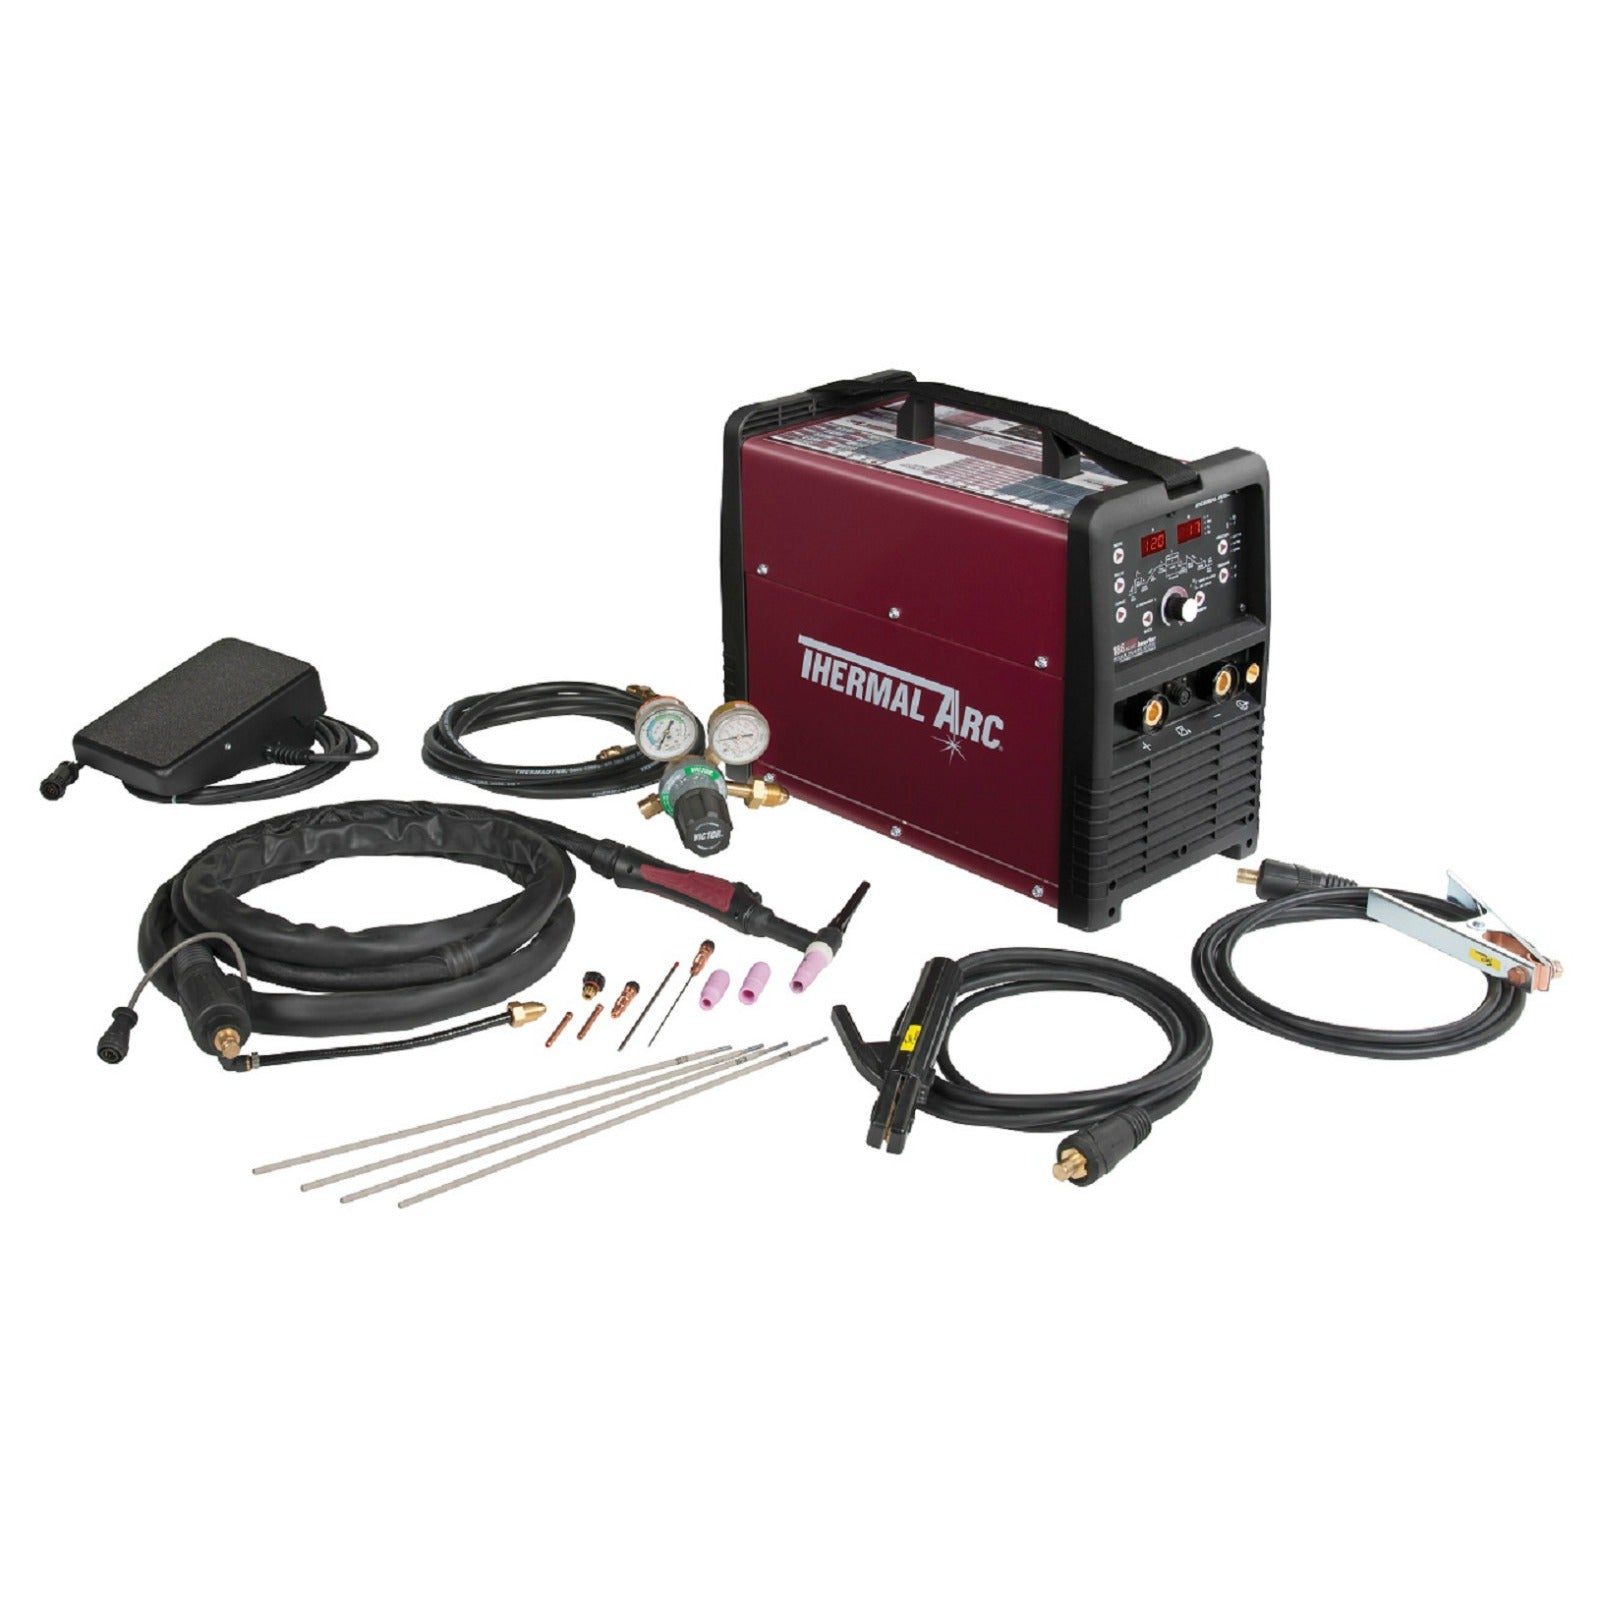 Thermal Arc 186 AC/DC TIG and Stick Welder Package with Foot Control (W1006301 & W4013200)